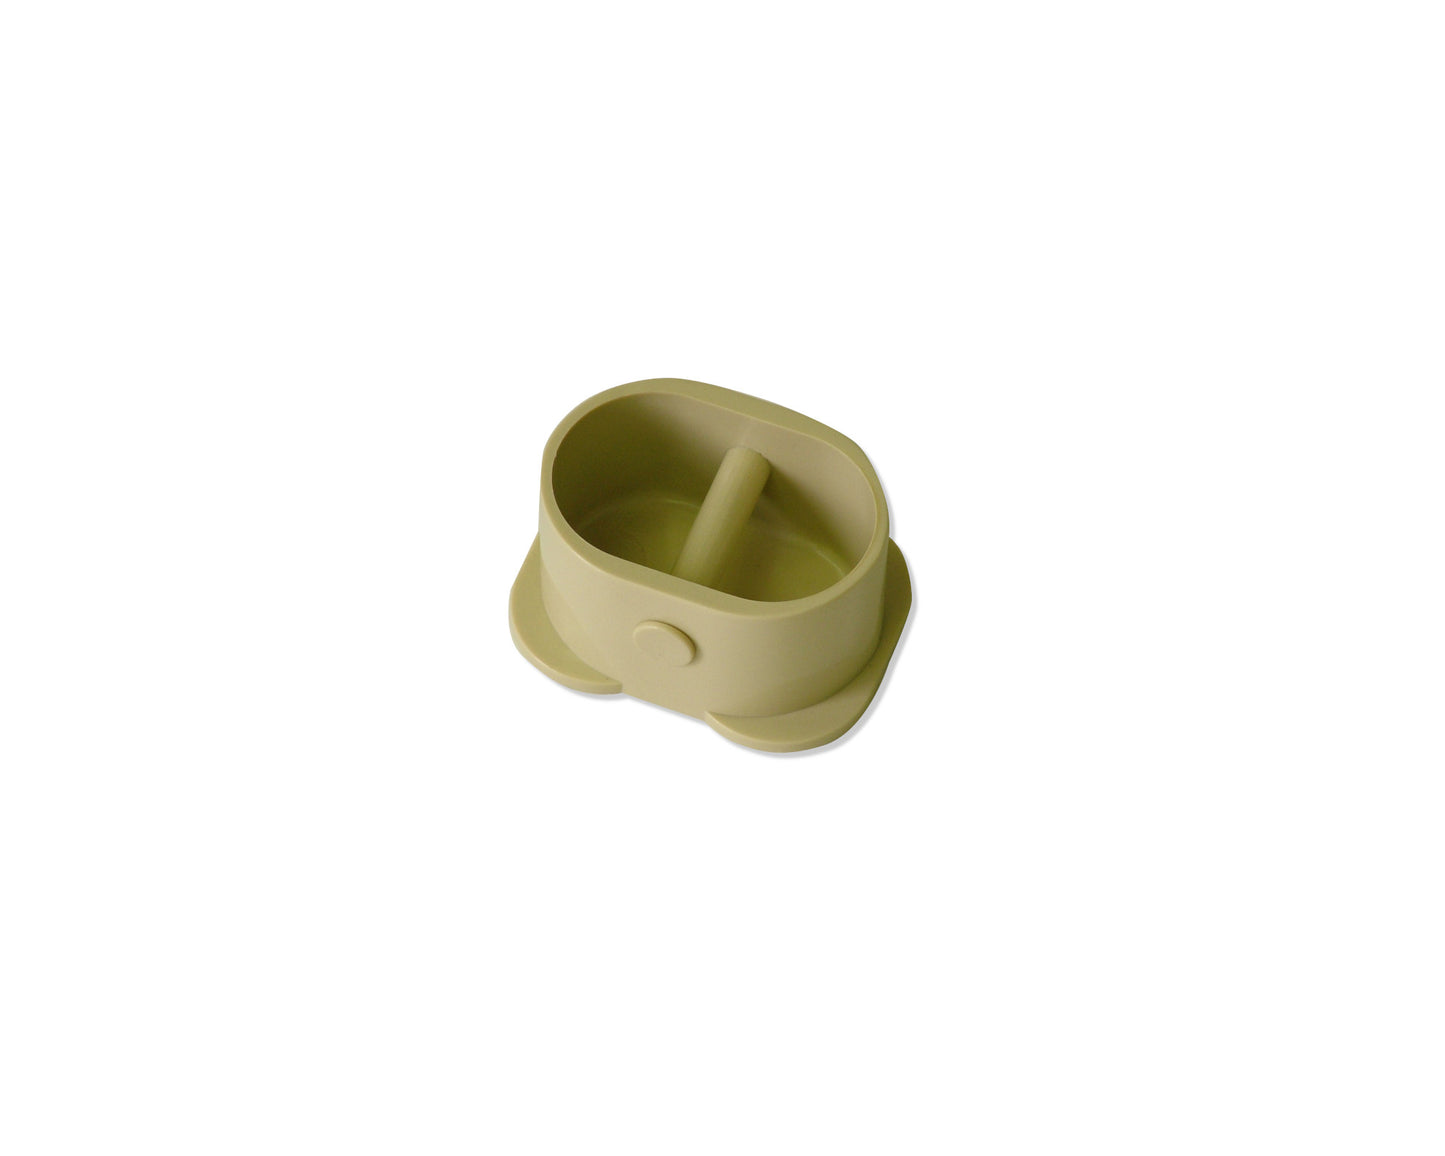 Afras Cup Anchor Reinforced Tan ABS